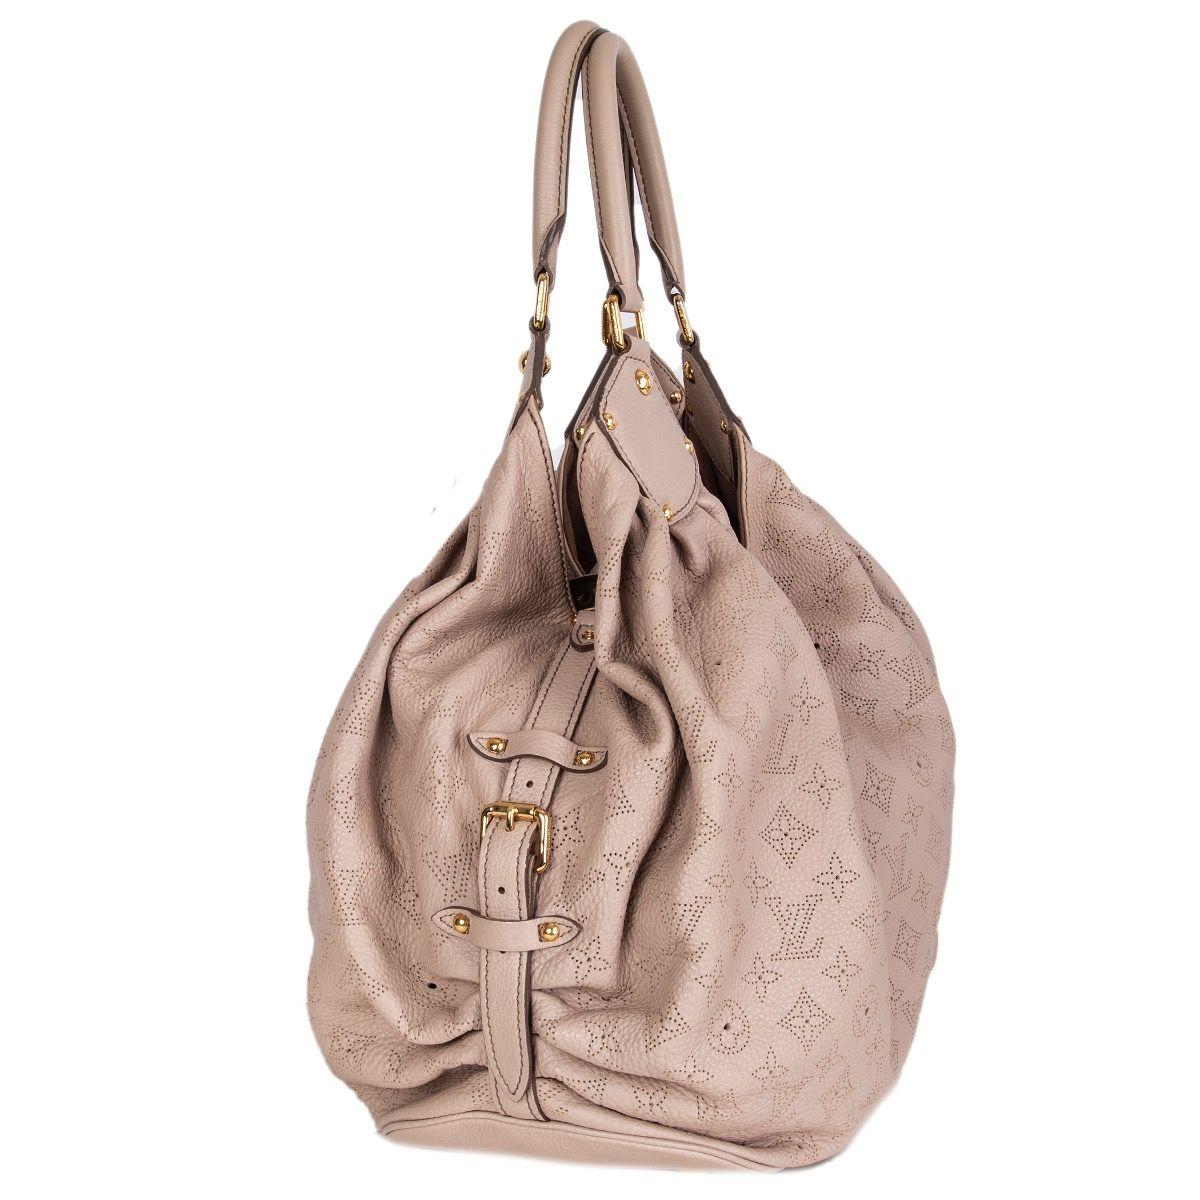 Louis Vuitton 'Mahina GM' hobo bag in sand beige perforated monogram leather and it features two handles and gold-tone hardware. The push-lock opens to a spacious beige alcantara lined interior with one zipper pocket against the back and a D ring.